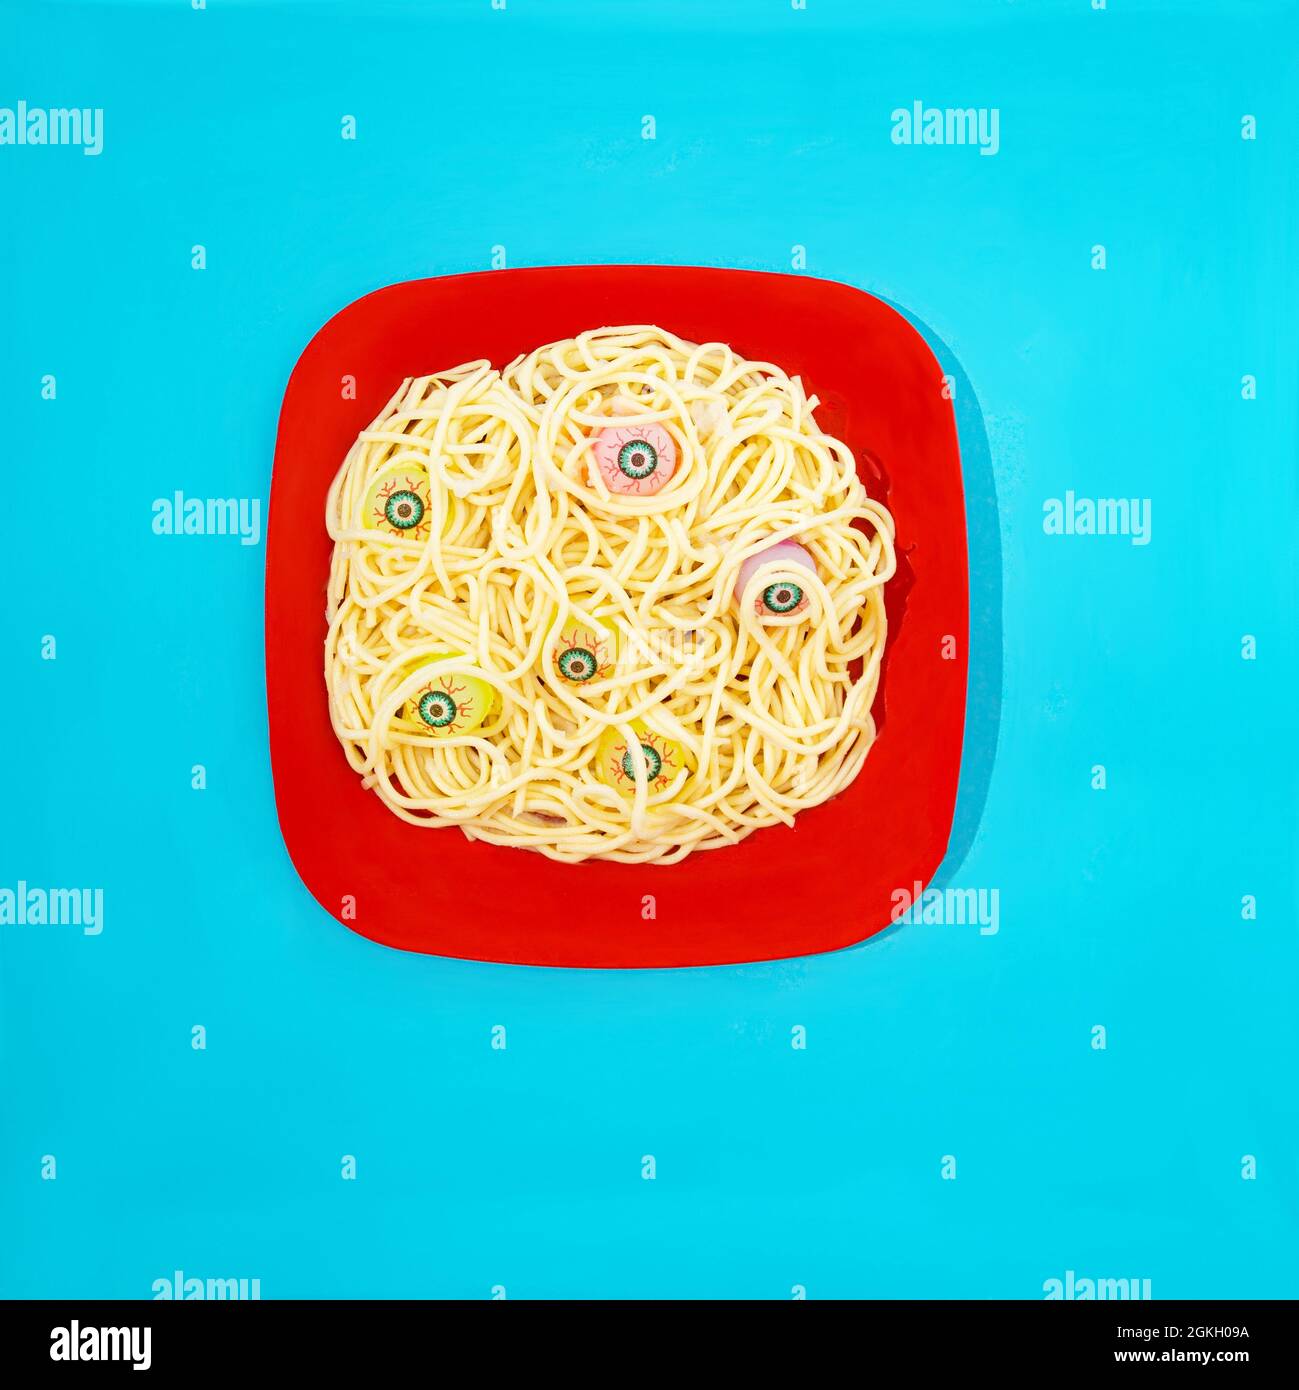 A red plate with spaghetti and scary eye balls emerging from the food. Pastel blue background. Halloween lunch or party invitation creative concept. Stock Photo